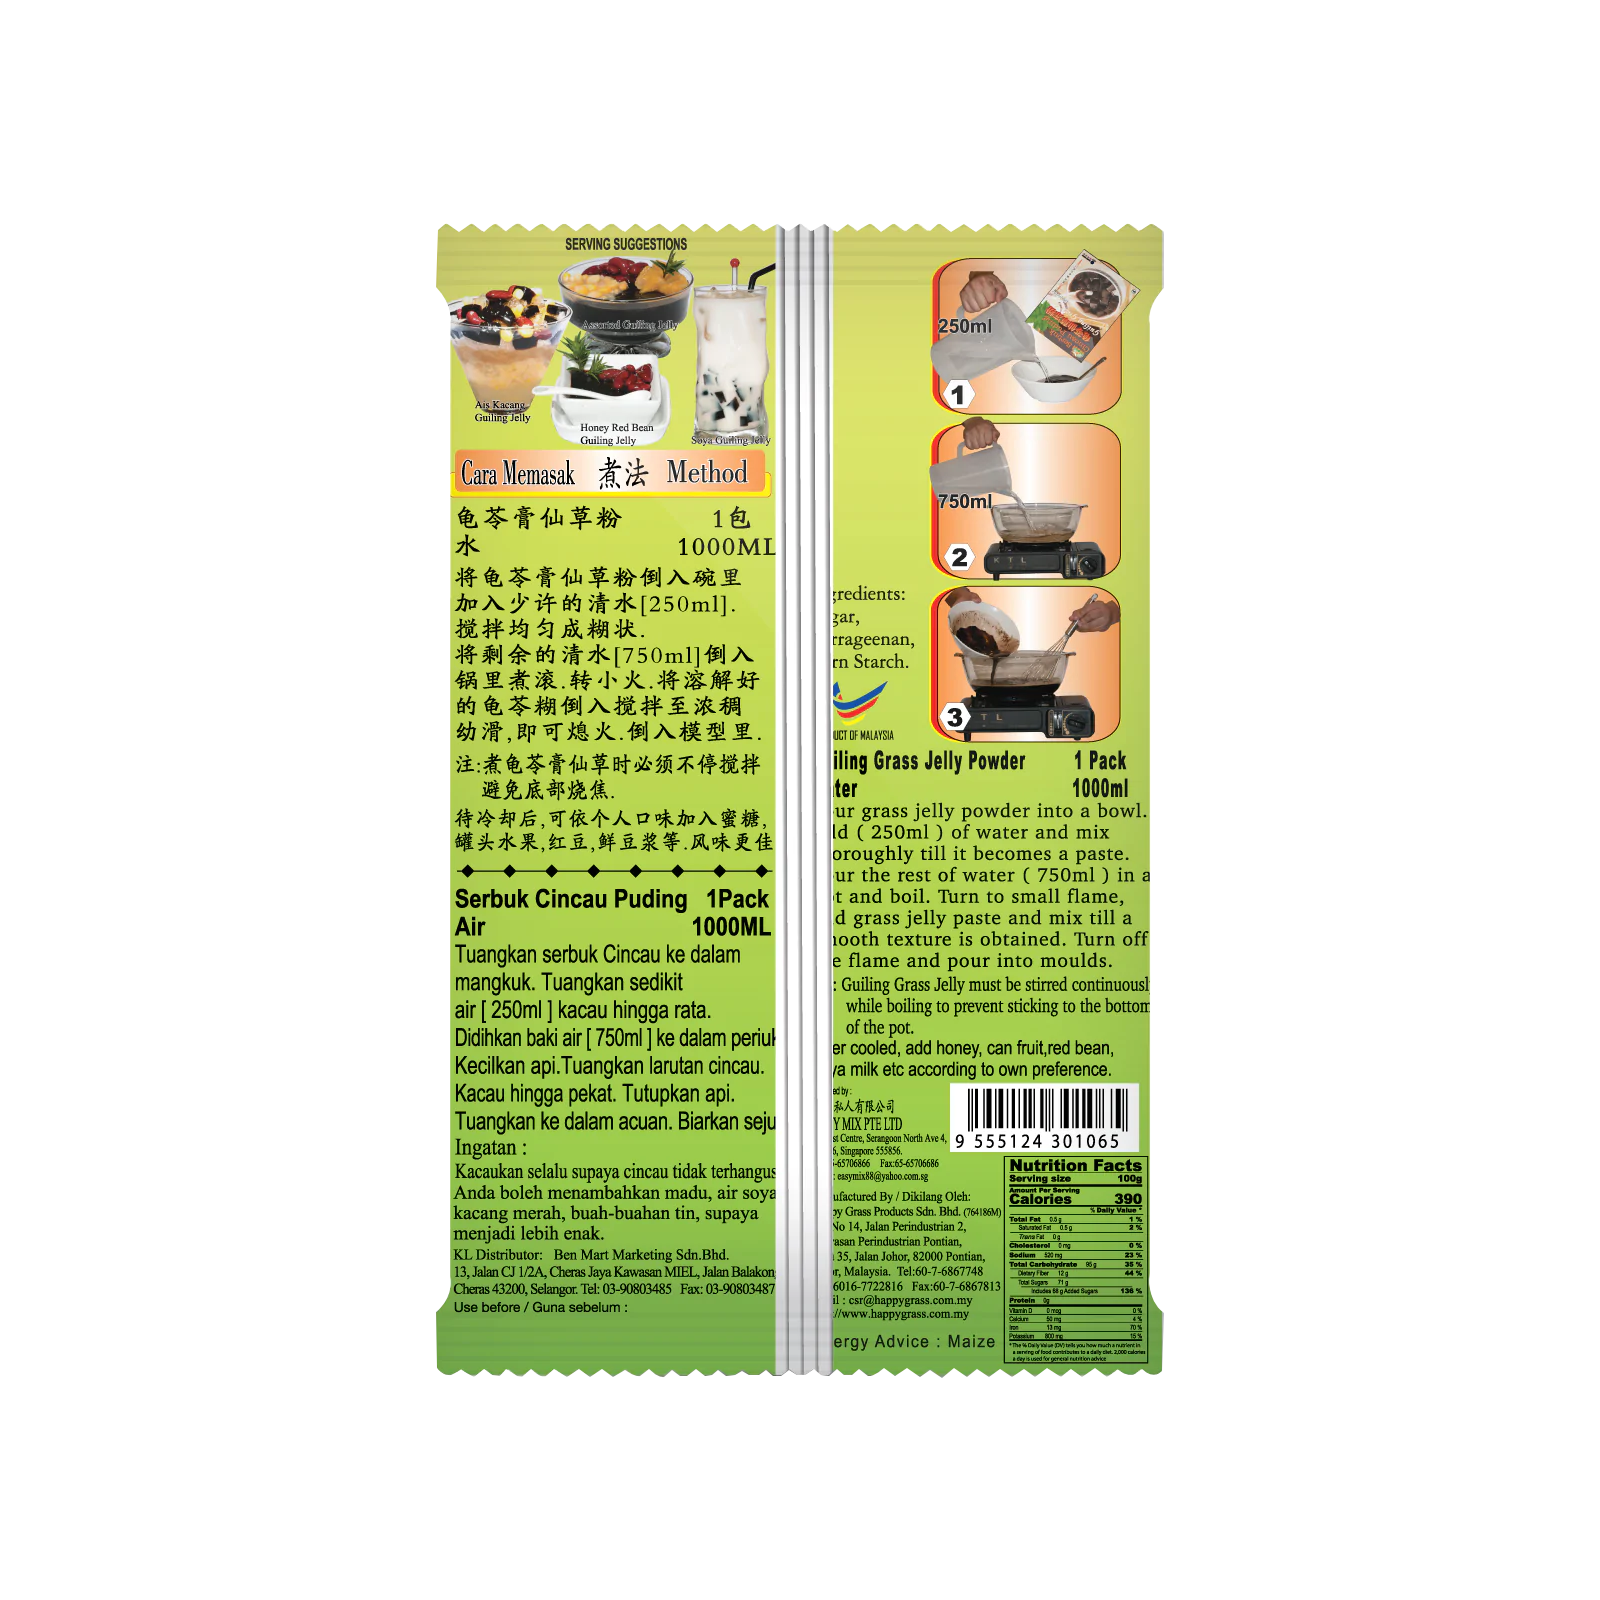 guiling grass jelly powder 1 (3)